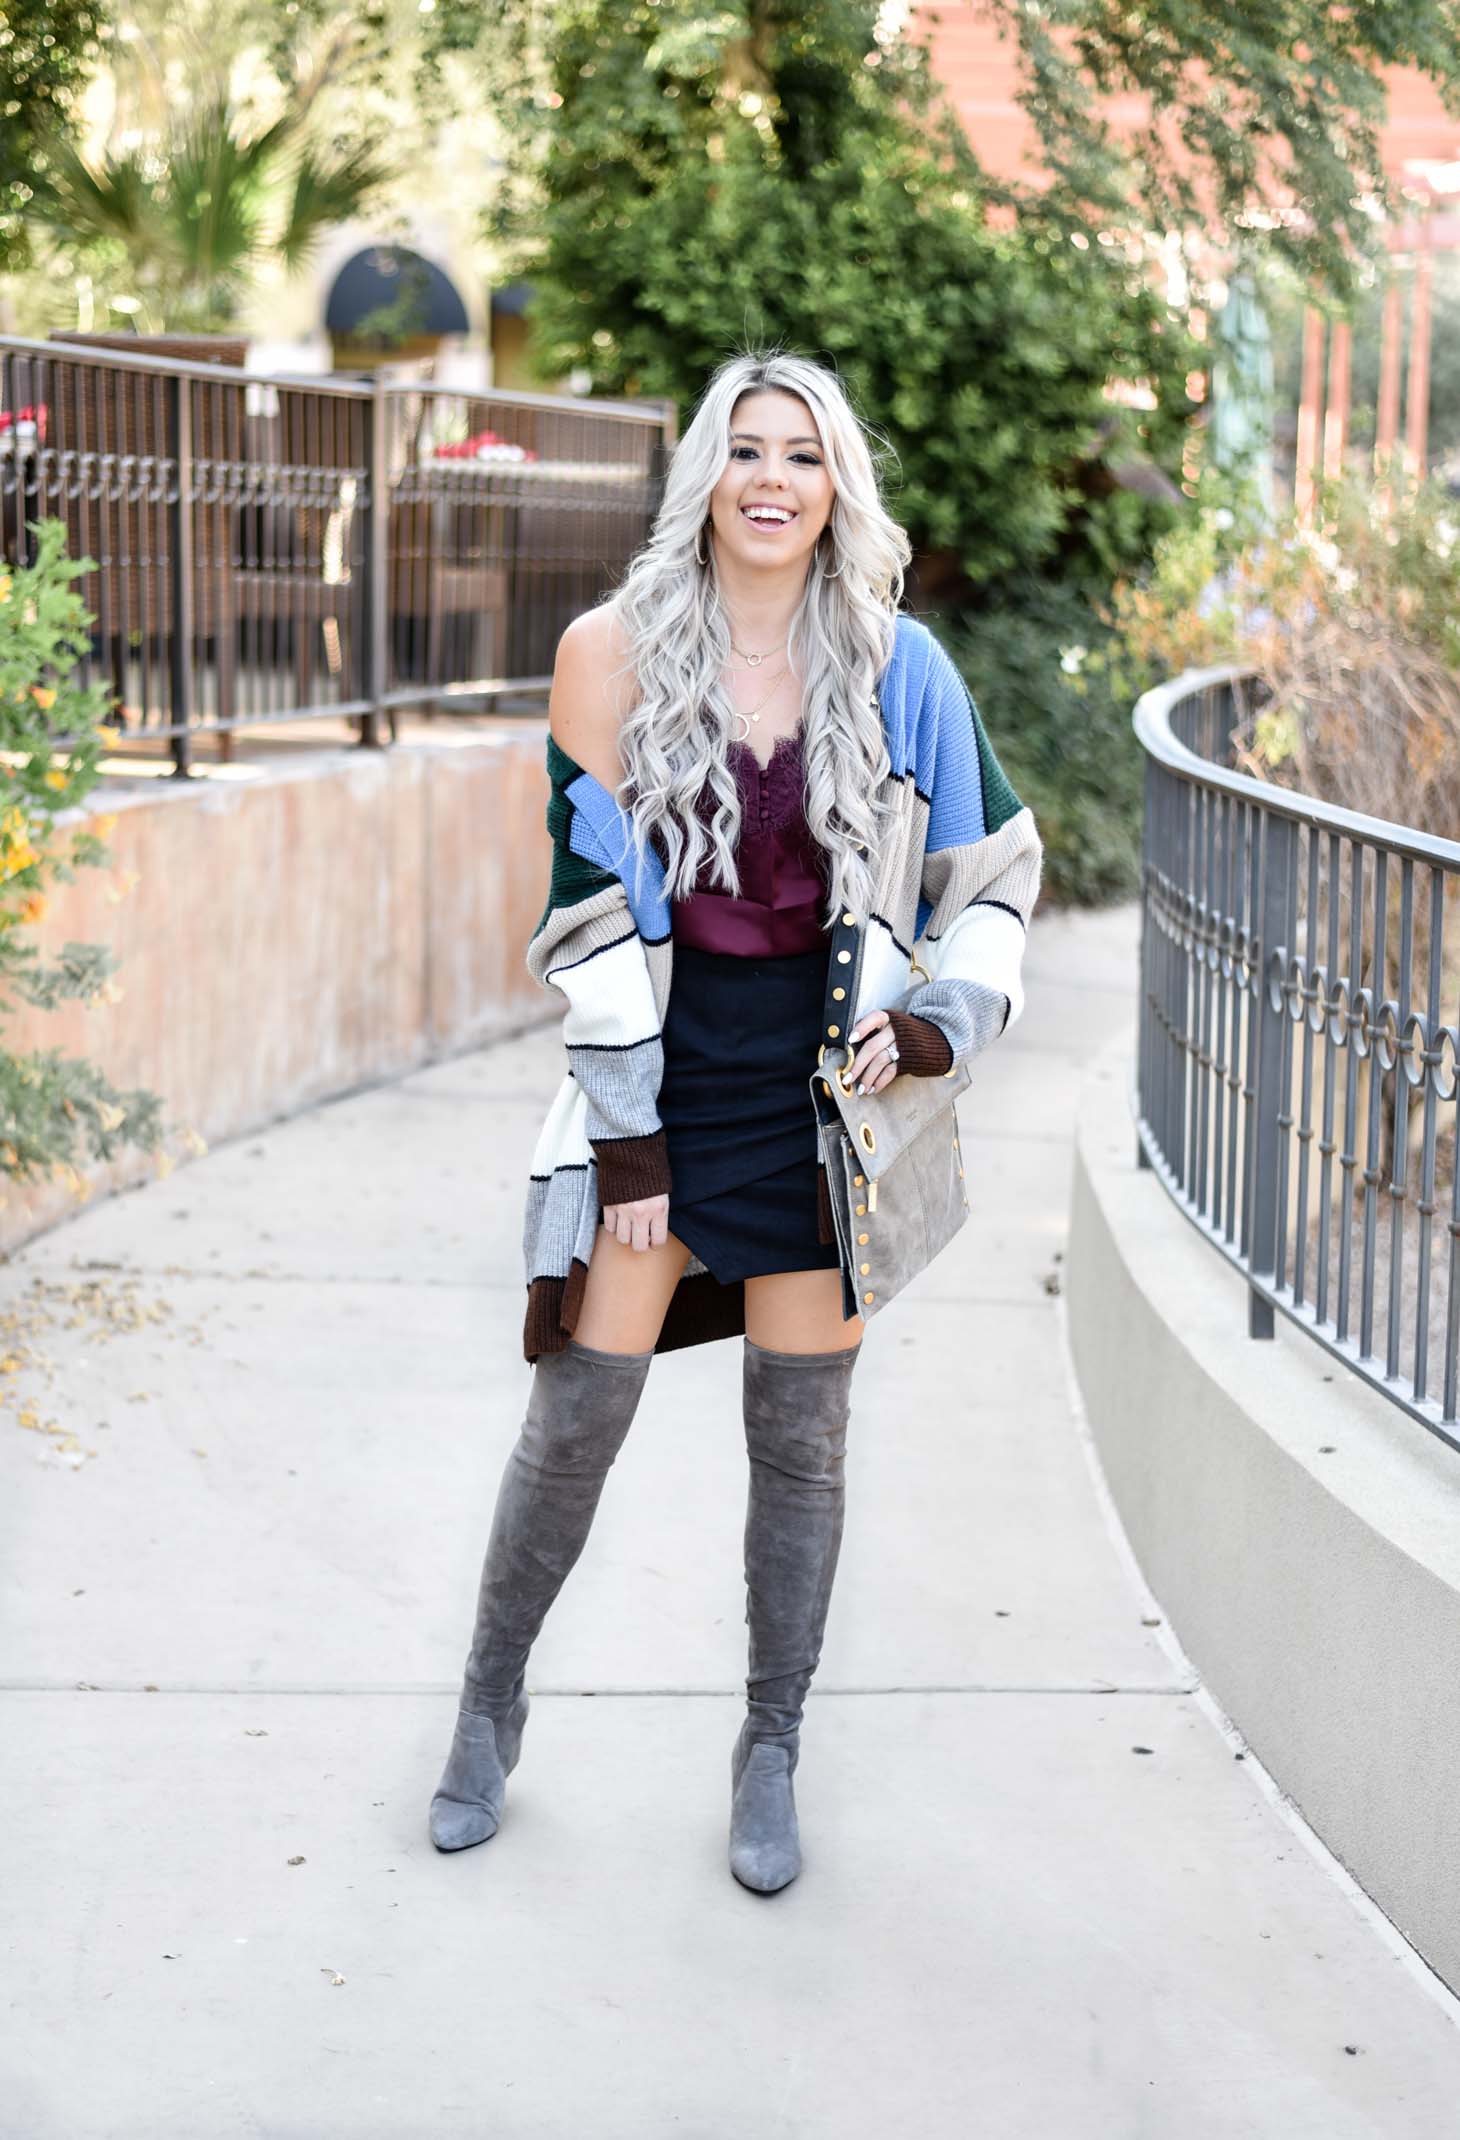 Erin Elizabeth of Wink and a Twirl shares a fun fall style from Goodnight Macaroon